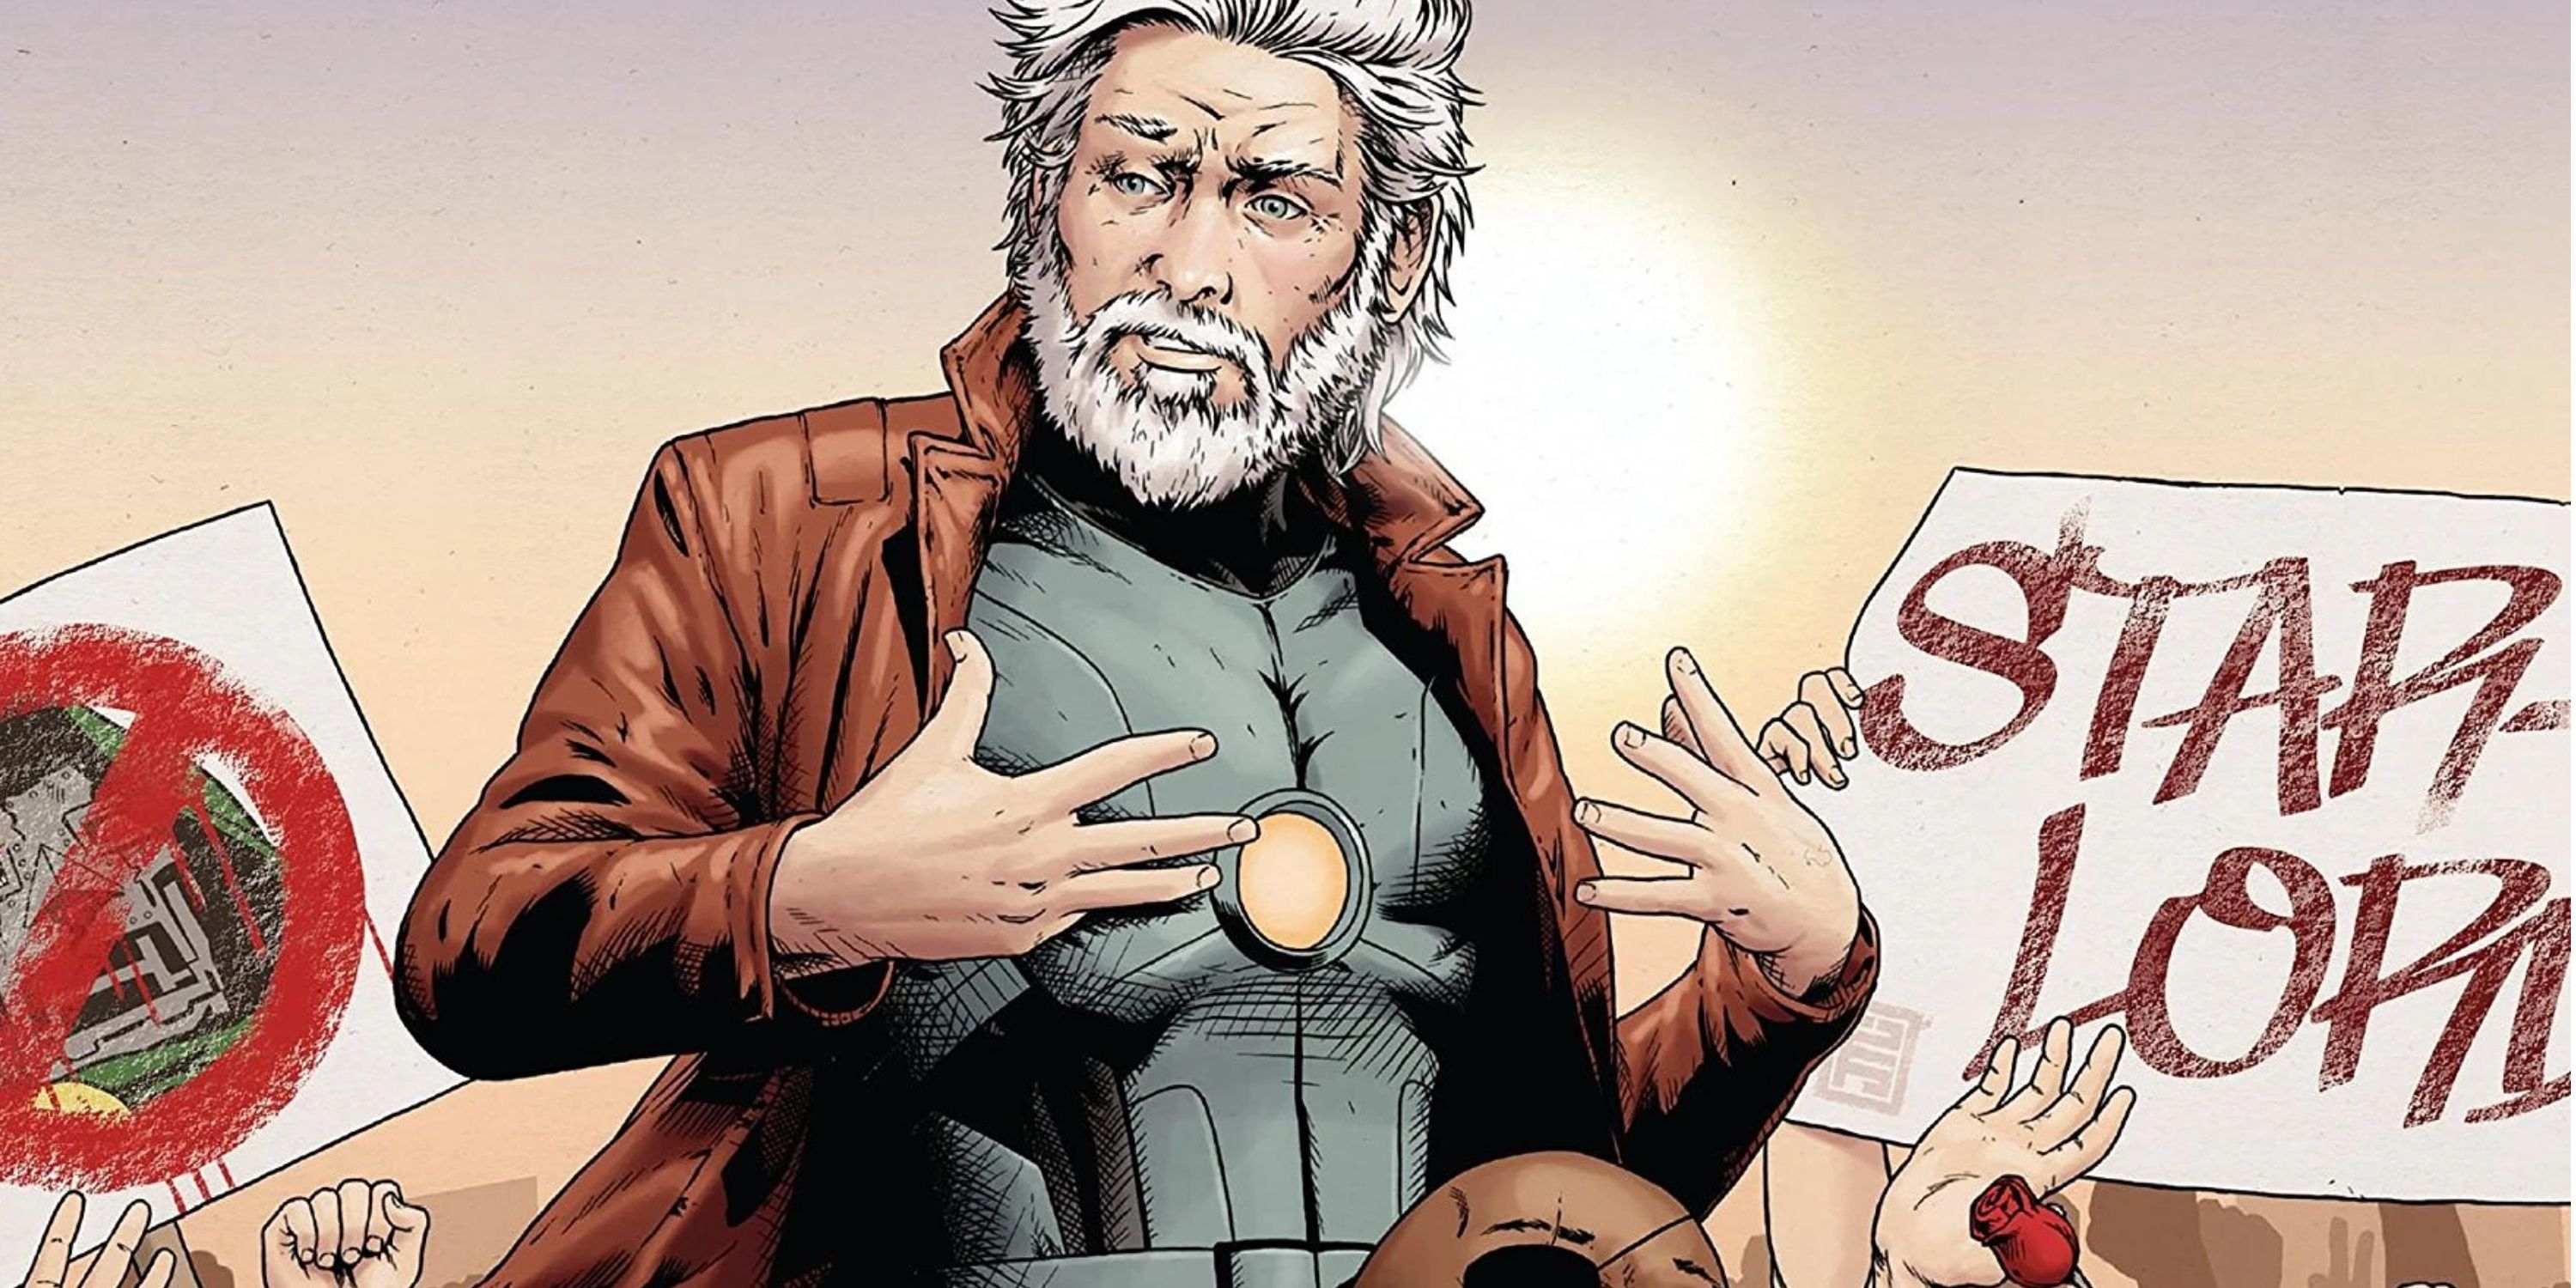 peter quill as an old man